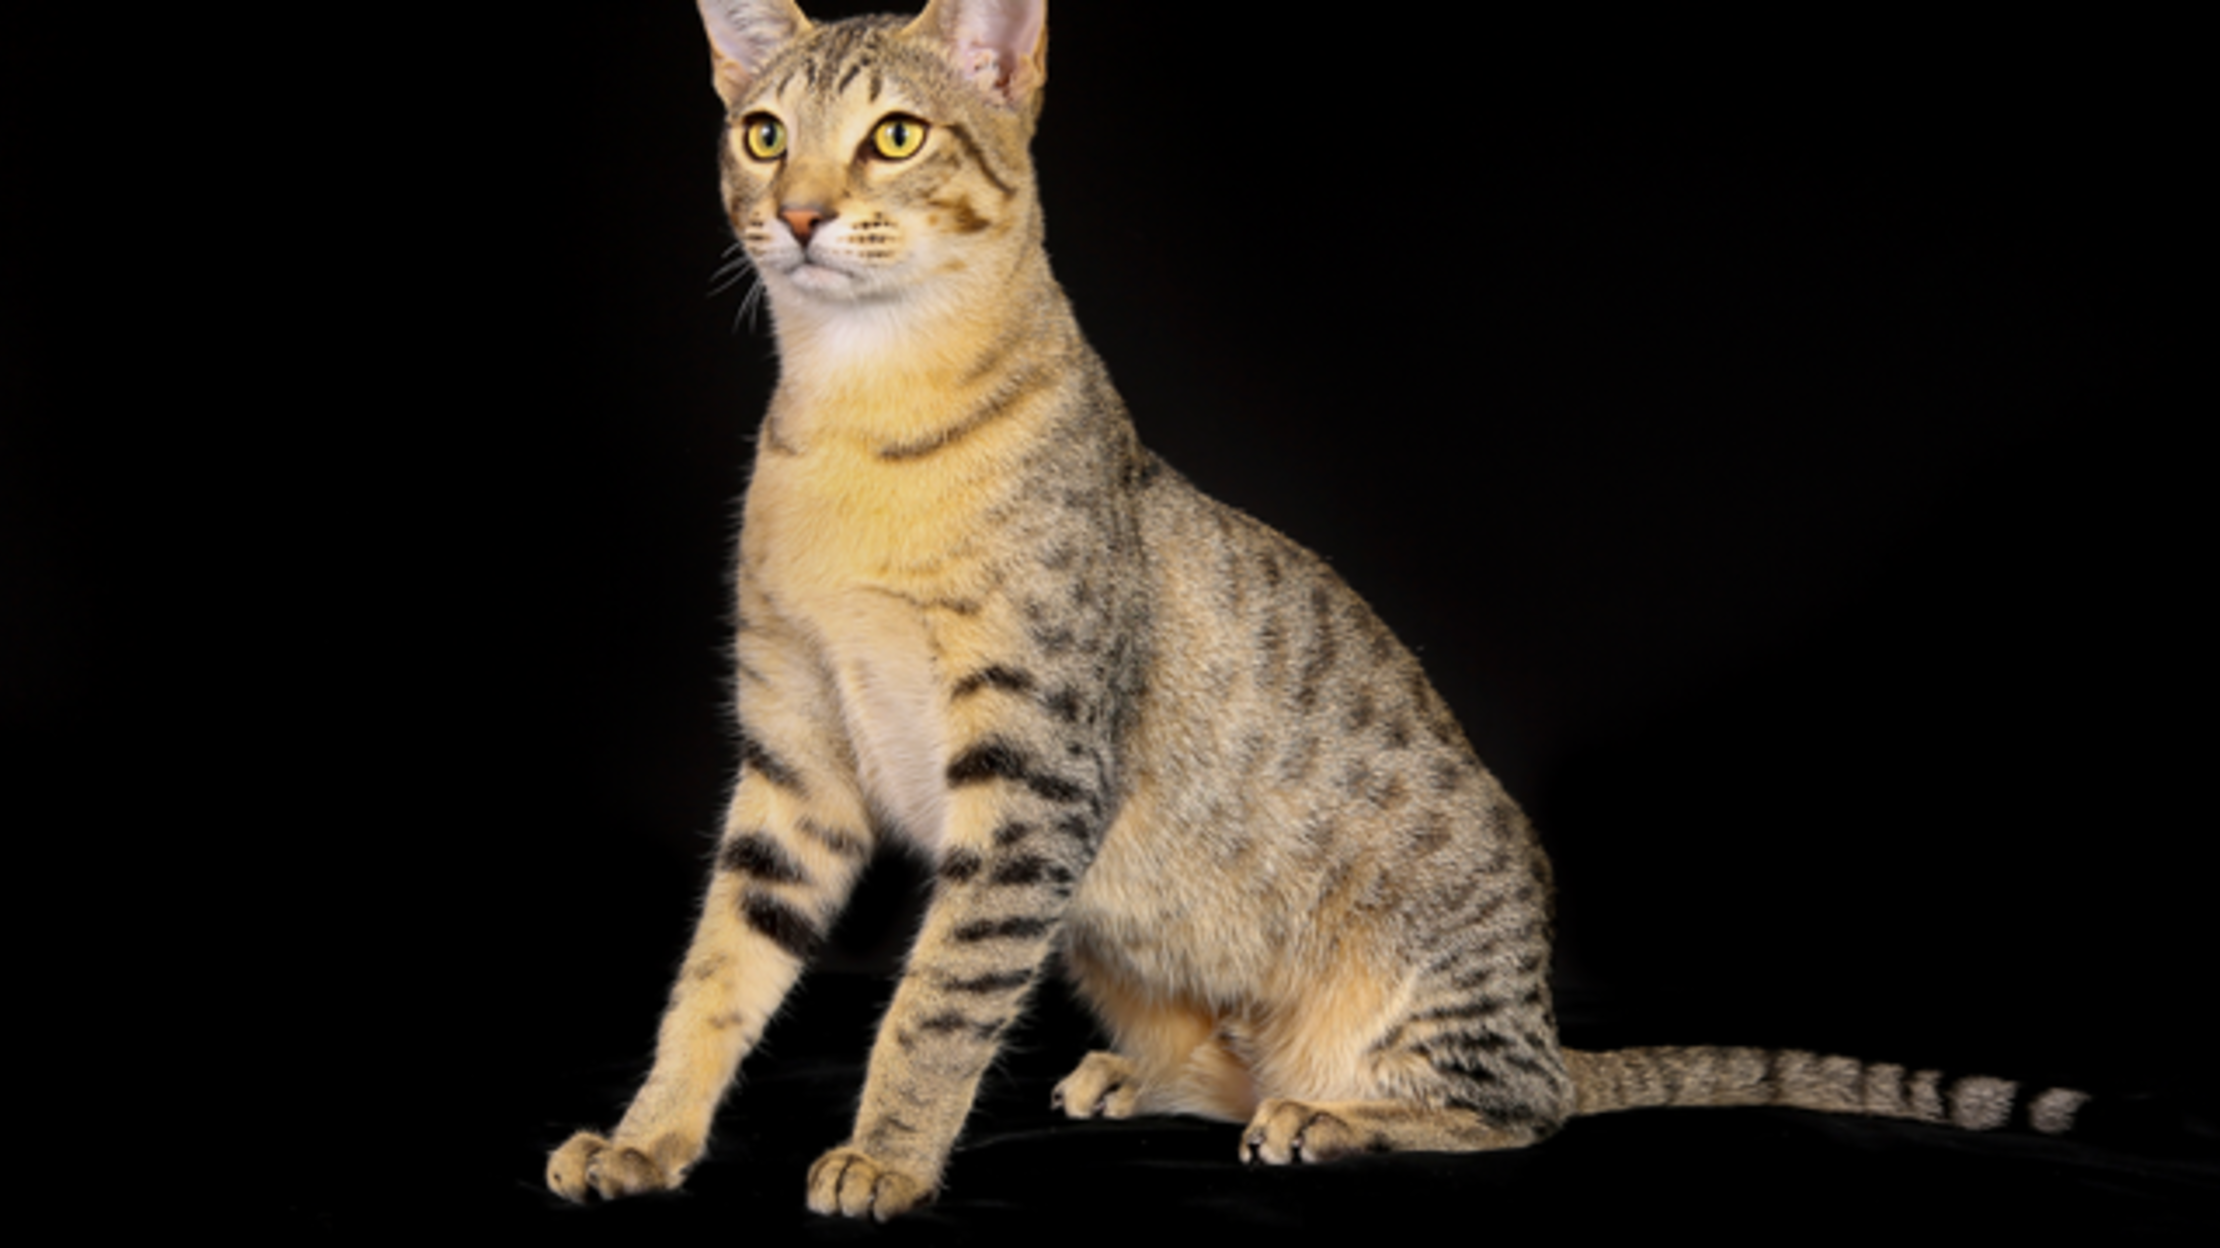 egyptian mau cat facts